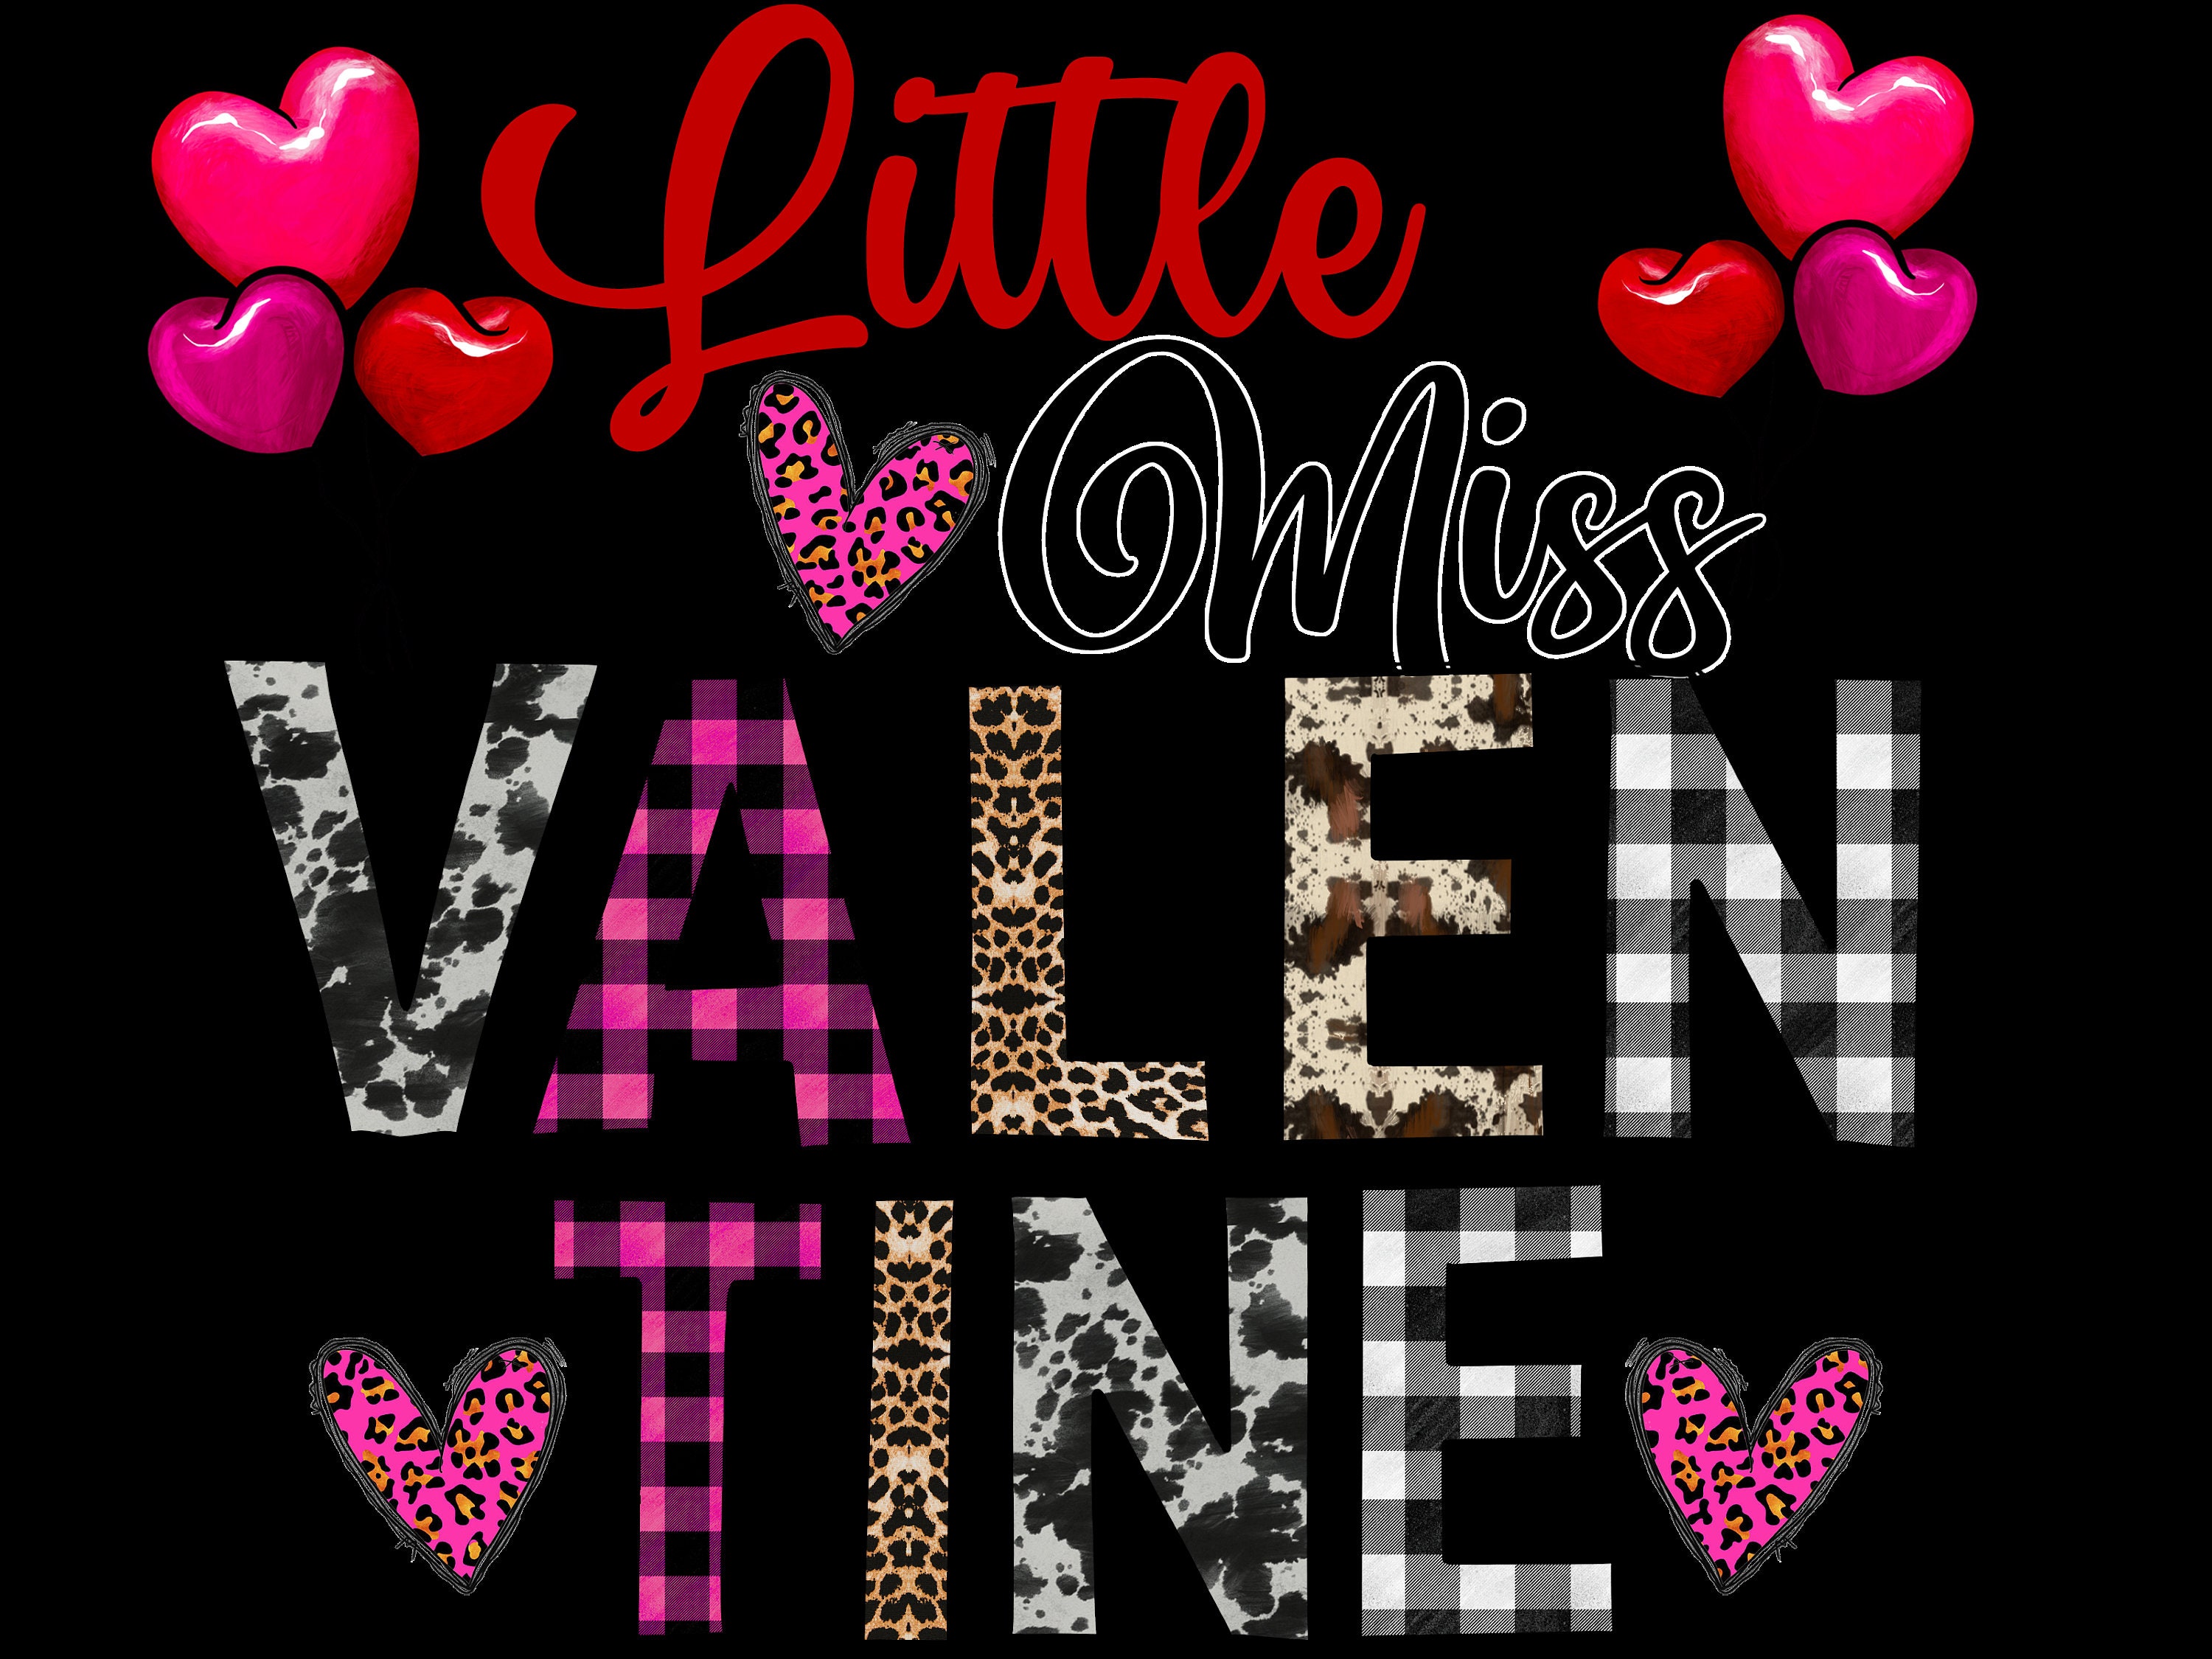 Little Miss Valentine T Shirt Iron on Transfer Decal #1